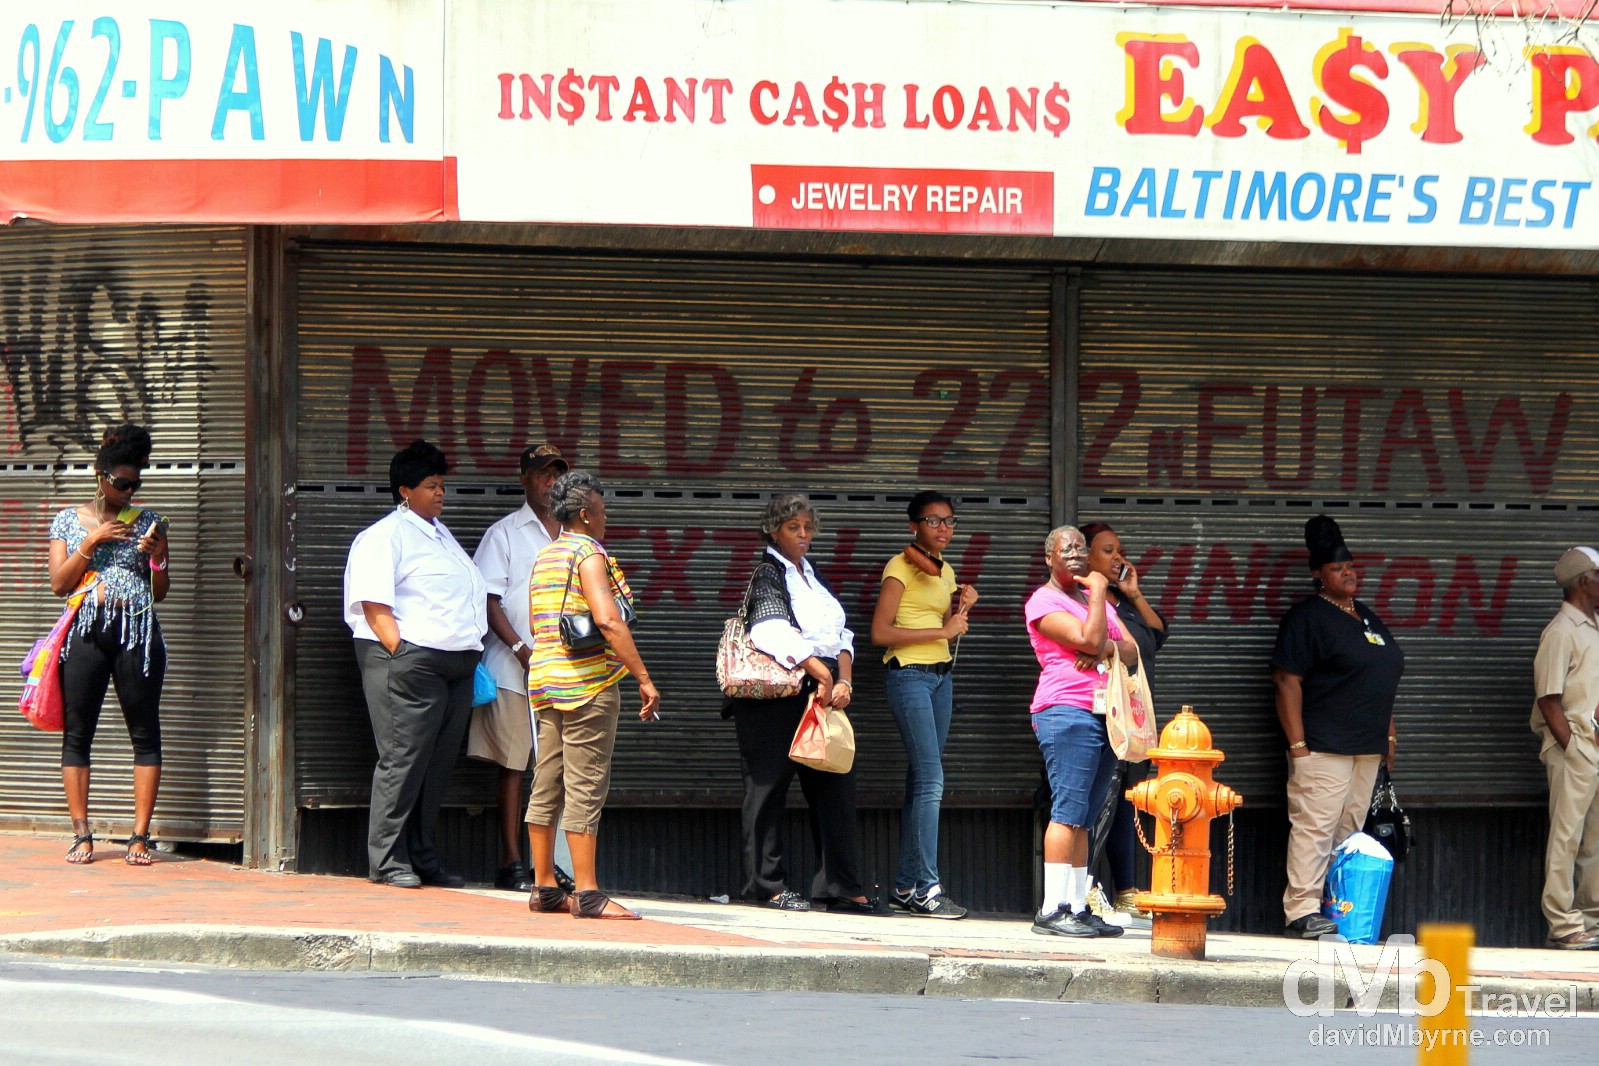 Hanging out on a corner of Howard Street, Westside, Baltimore, Maryland, USA. July 10th 2013.